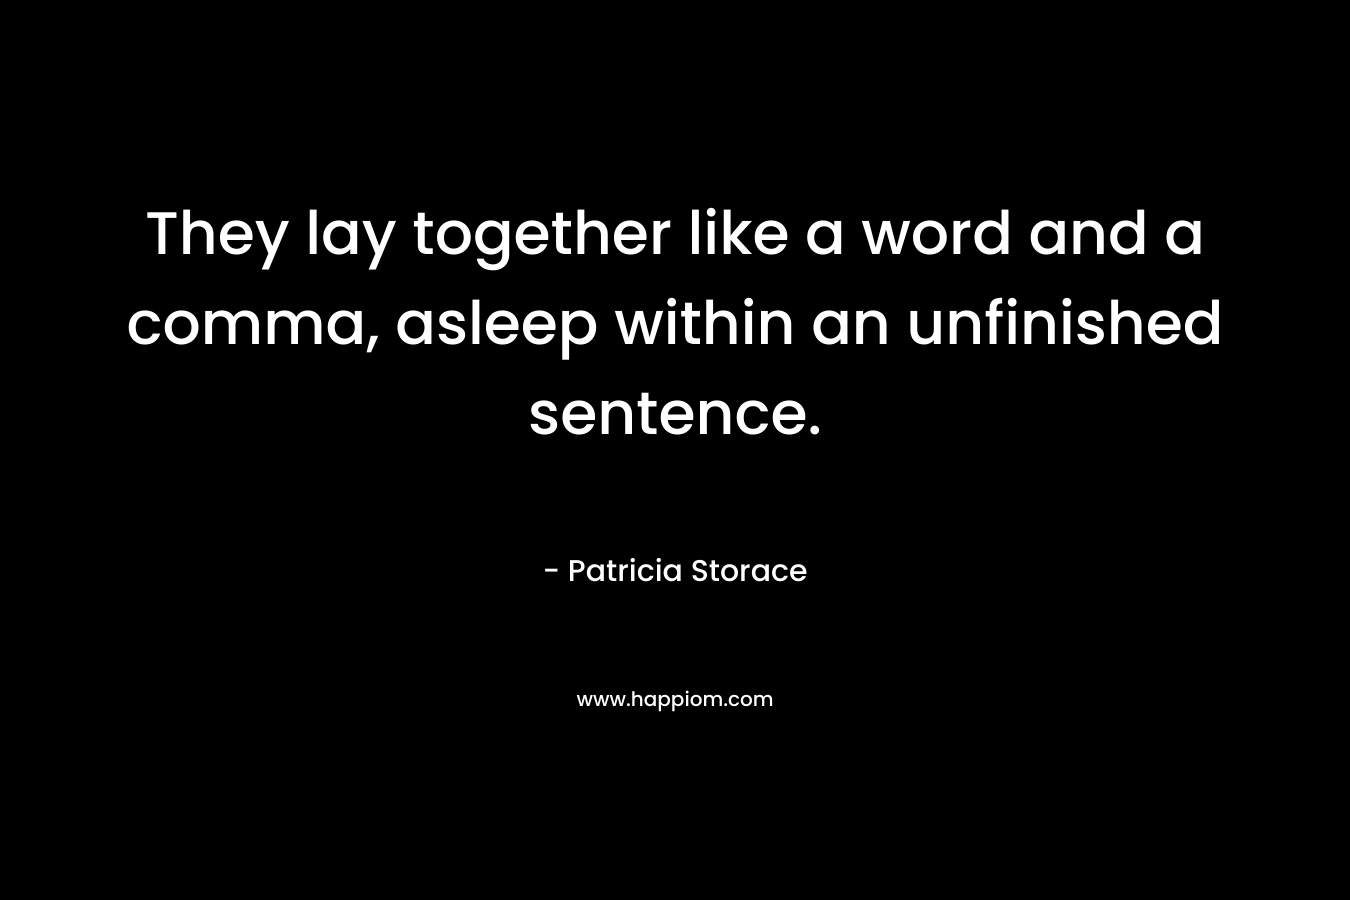 They lay together like a word and a comma, asleep within an unfinished sentence. – Patricia Storace